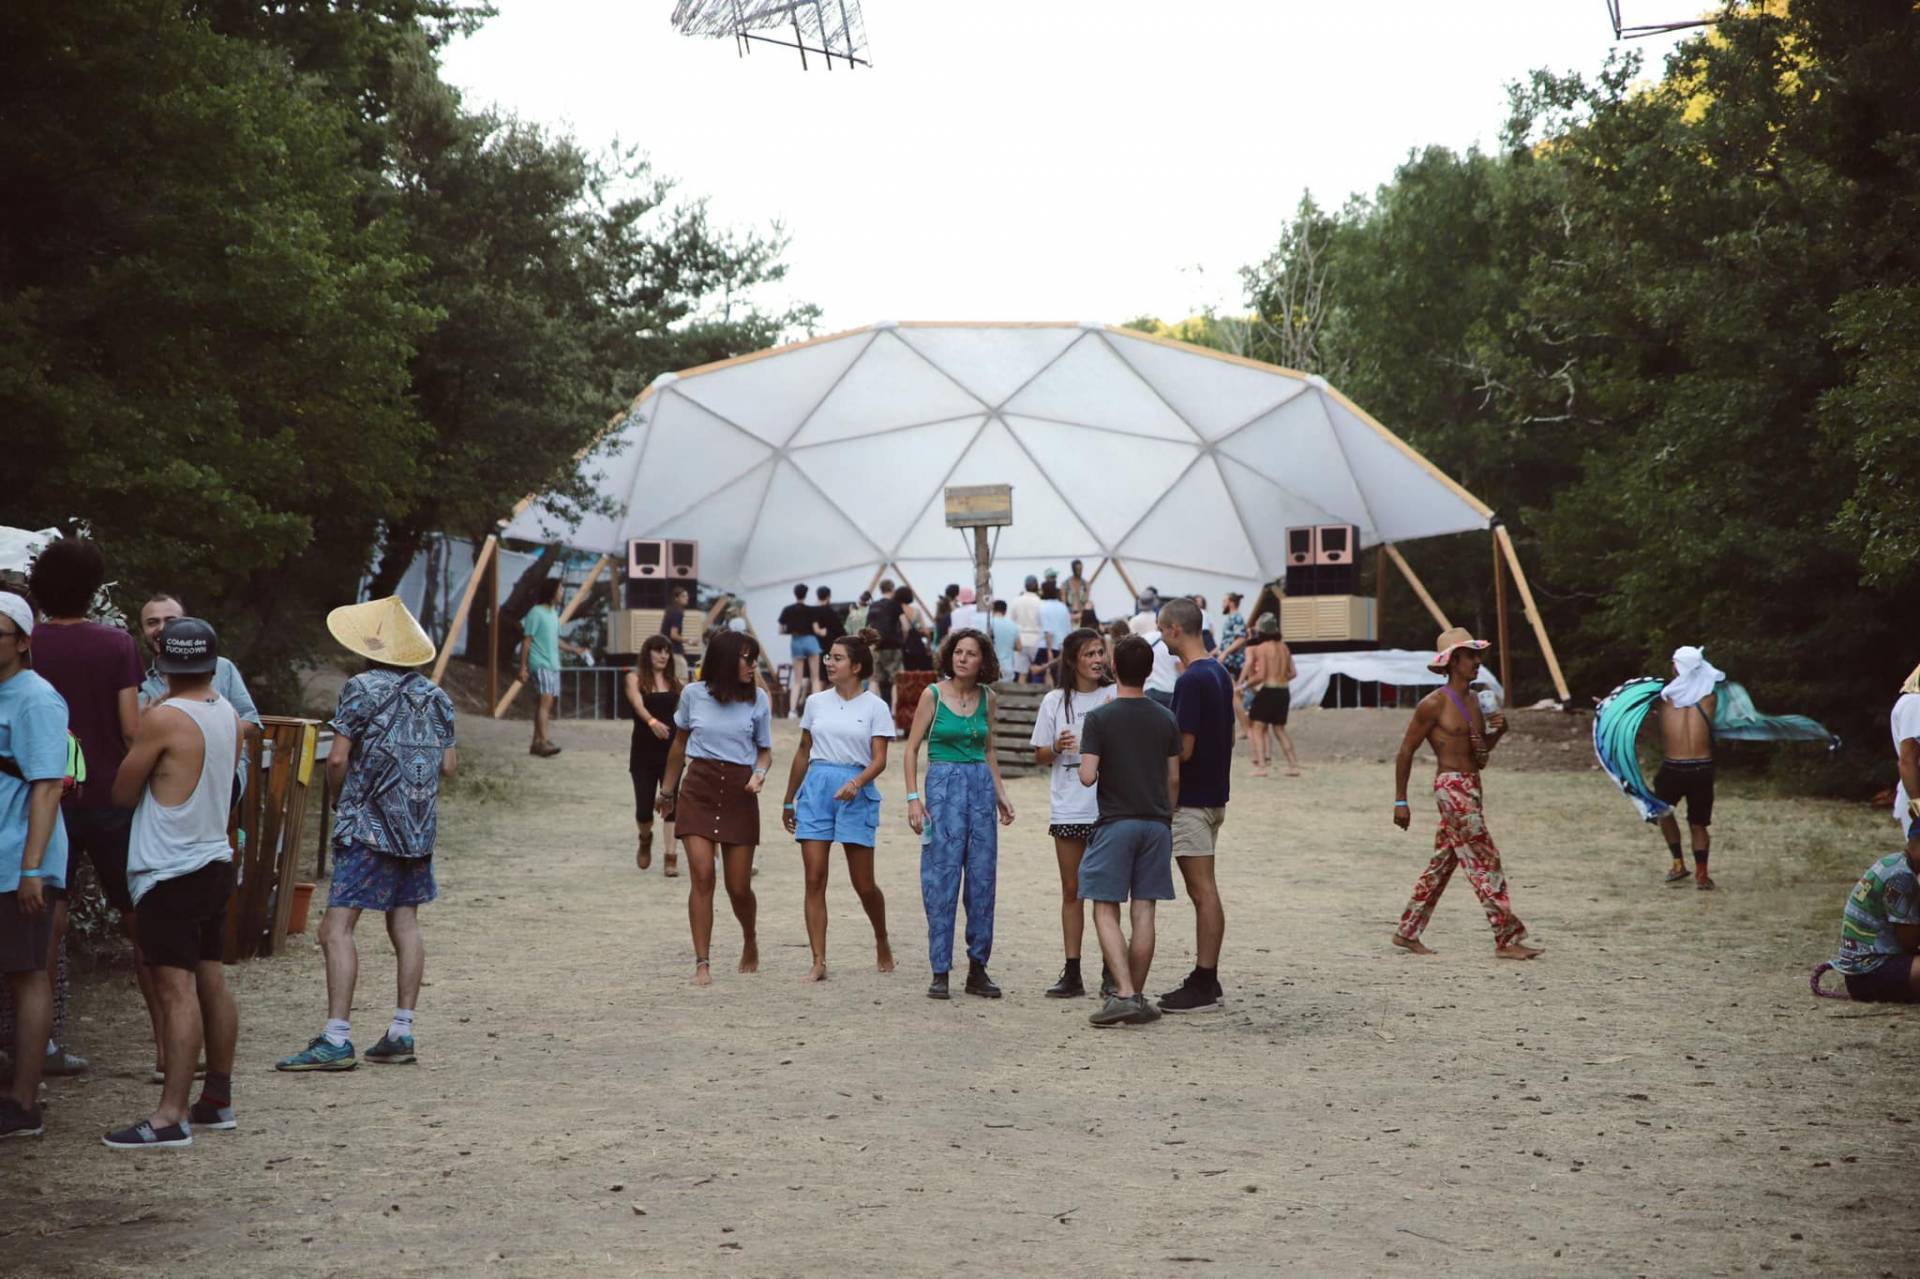 La Vallée Electrique festial with geodesic dome and festival goers